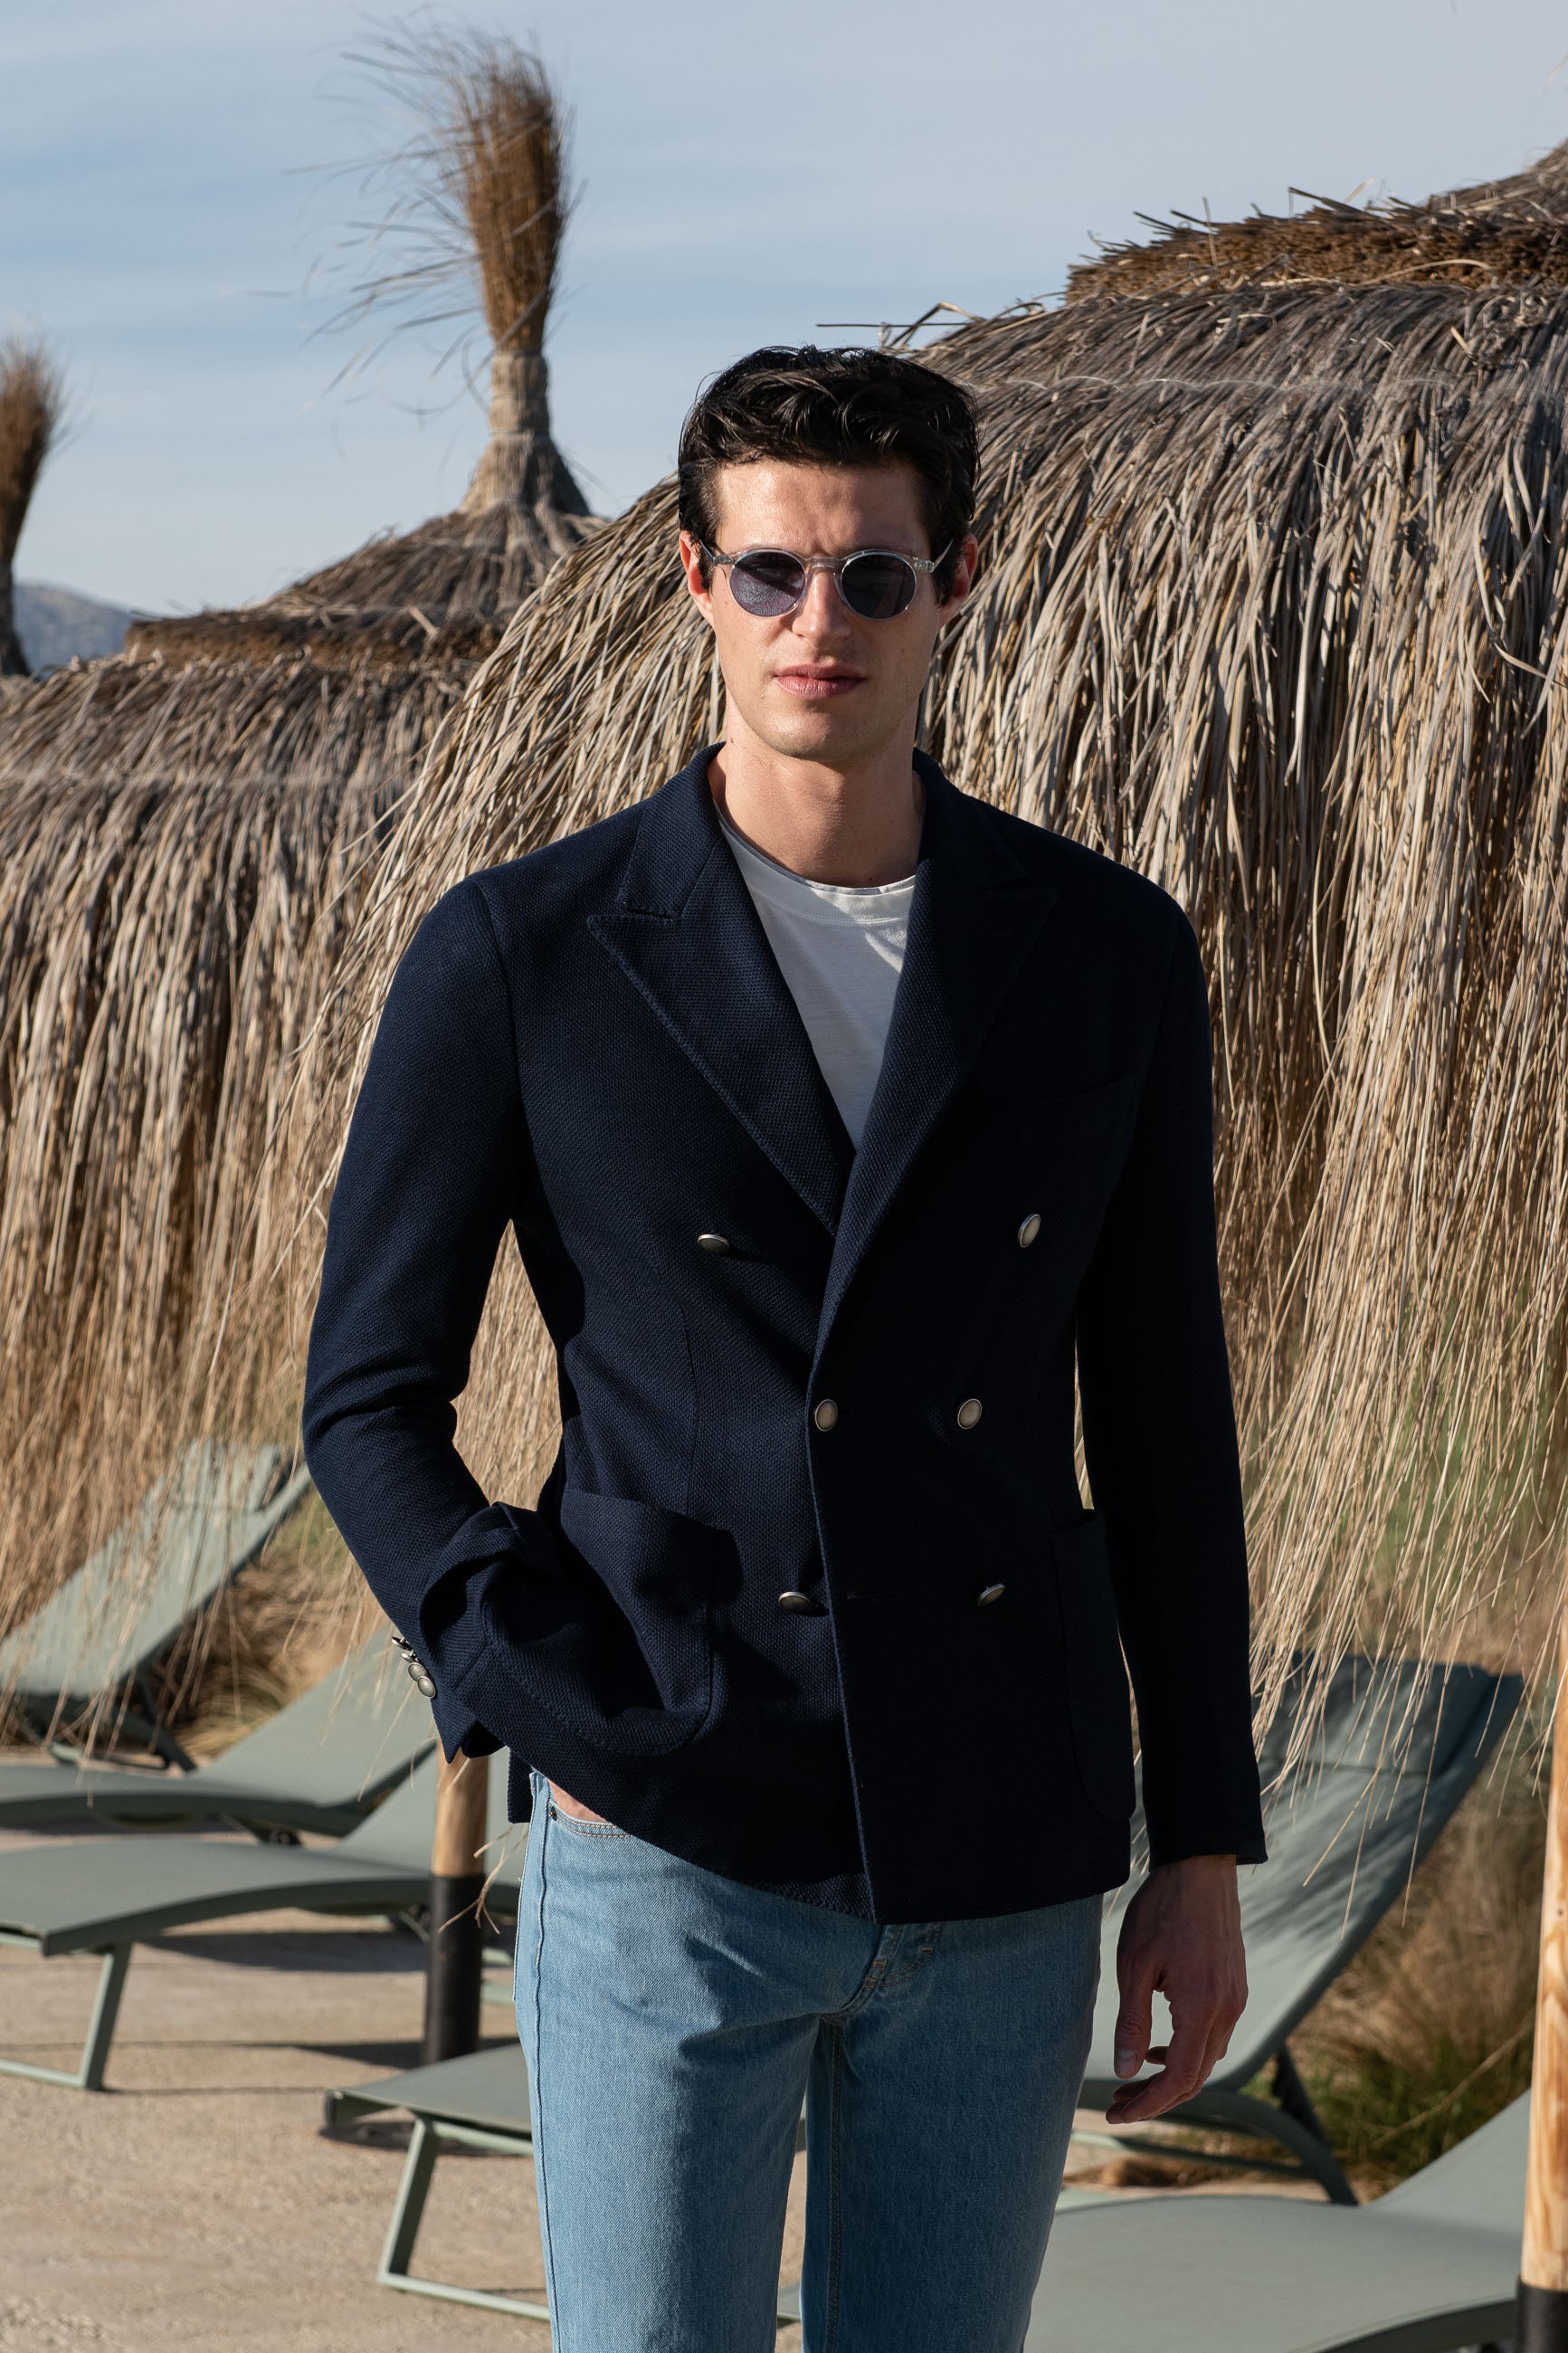 Navy Jersey Jacket, Double Breasted Jersey Jacket, Blue Navy Jersey Jacket, Veste en jersey bleu marine, Veste en jersey à double boutonnage, Veste en jersey bleu marine, Giacca in jersey navy, giacca in jersey doppiopetto, giacca in jersey blu navy, 